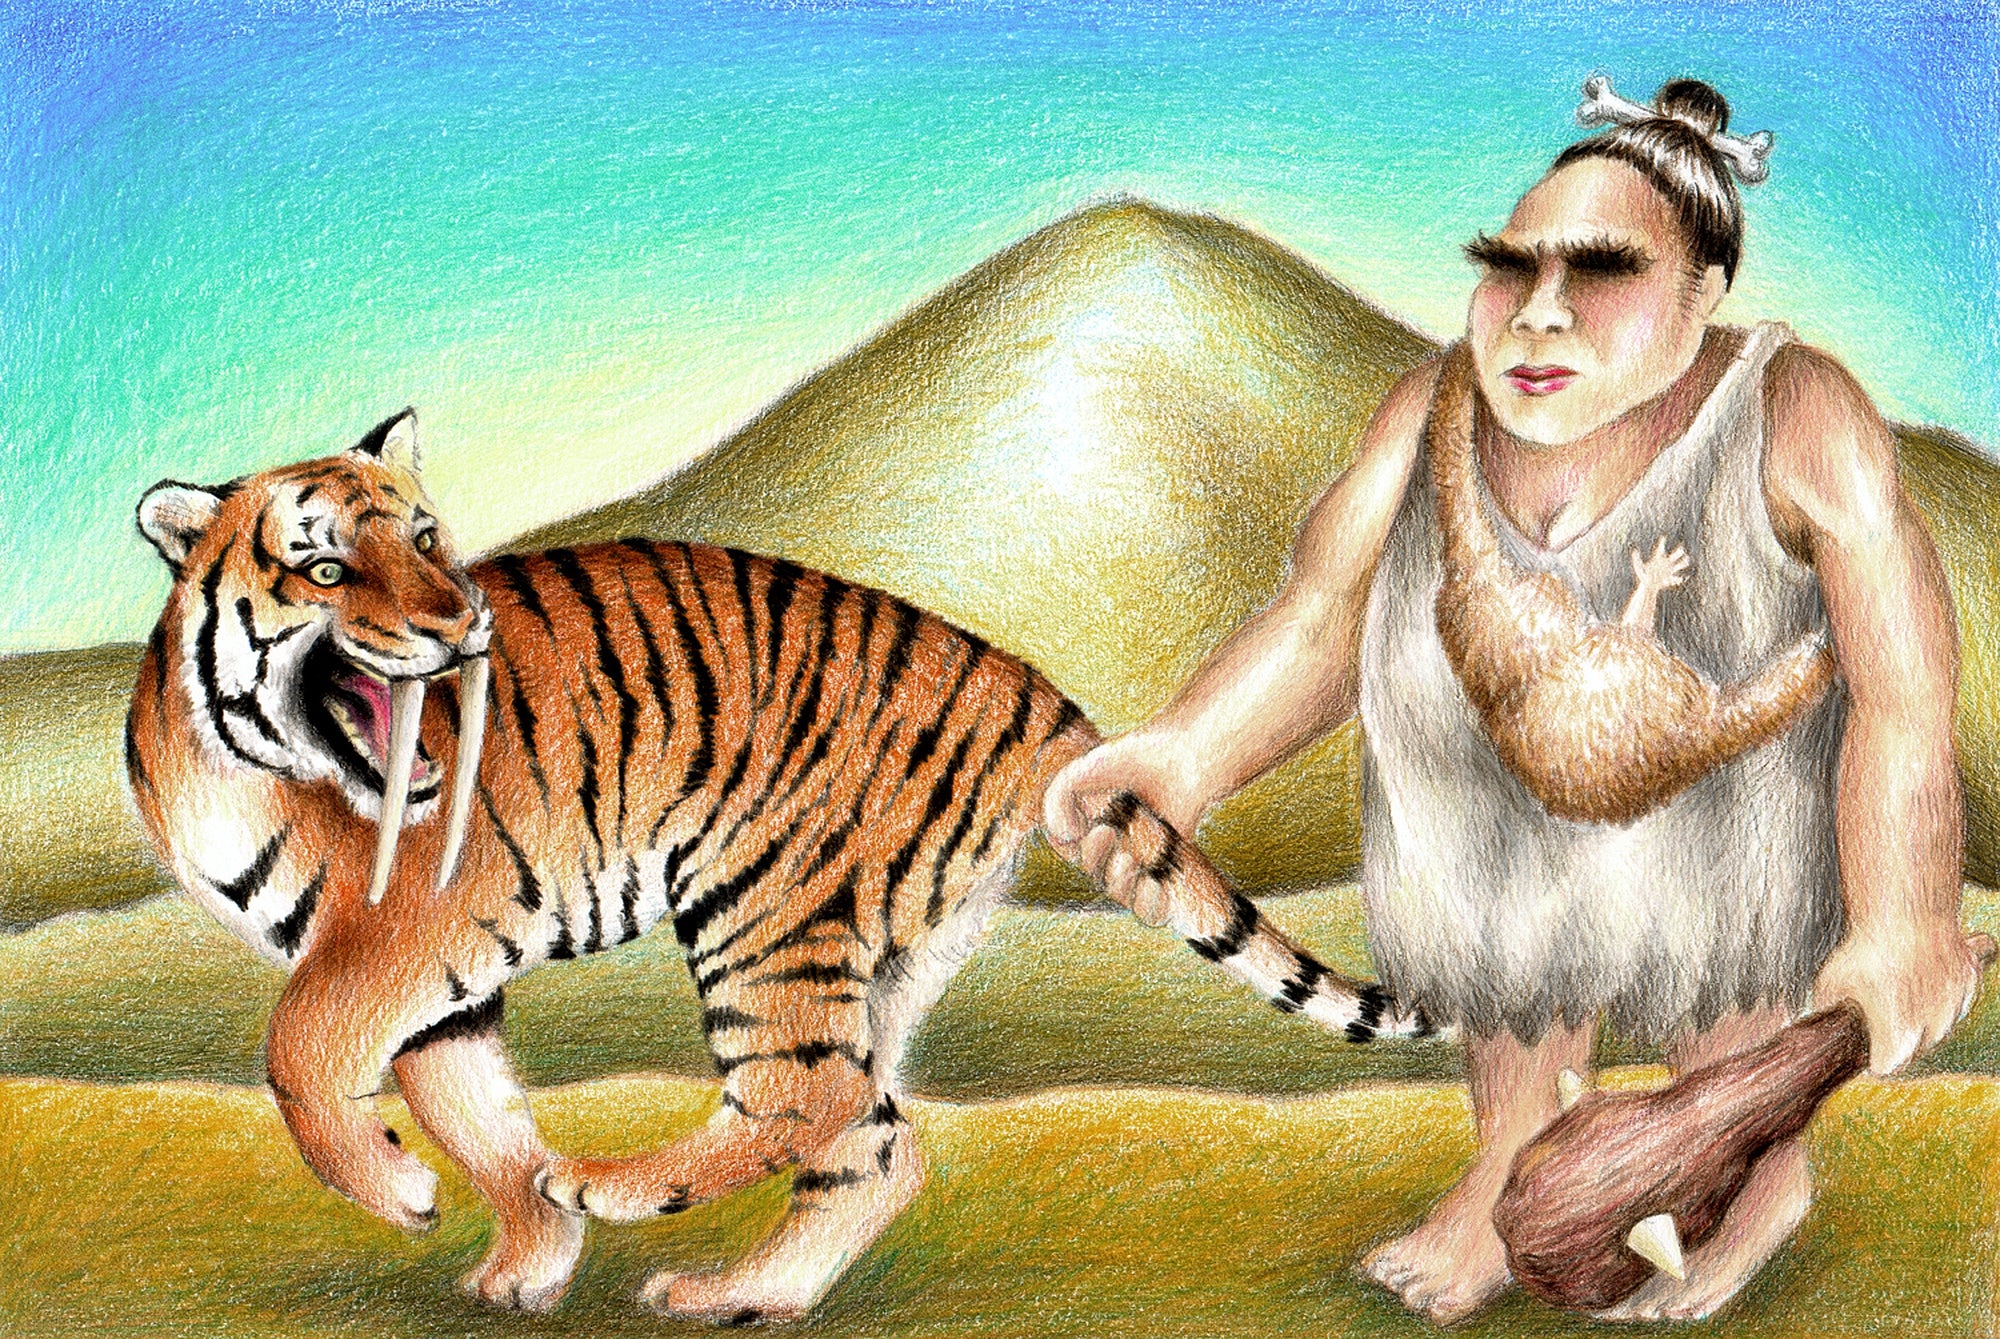 Early man taming a wild saber tooth tiger